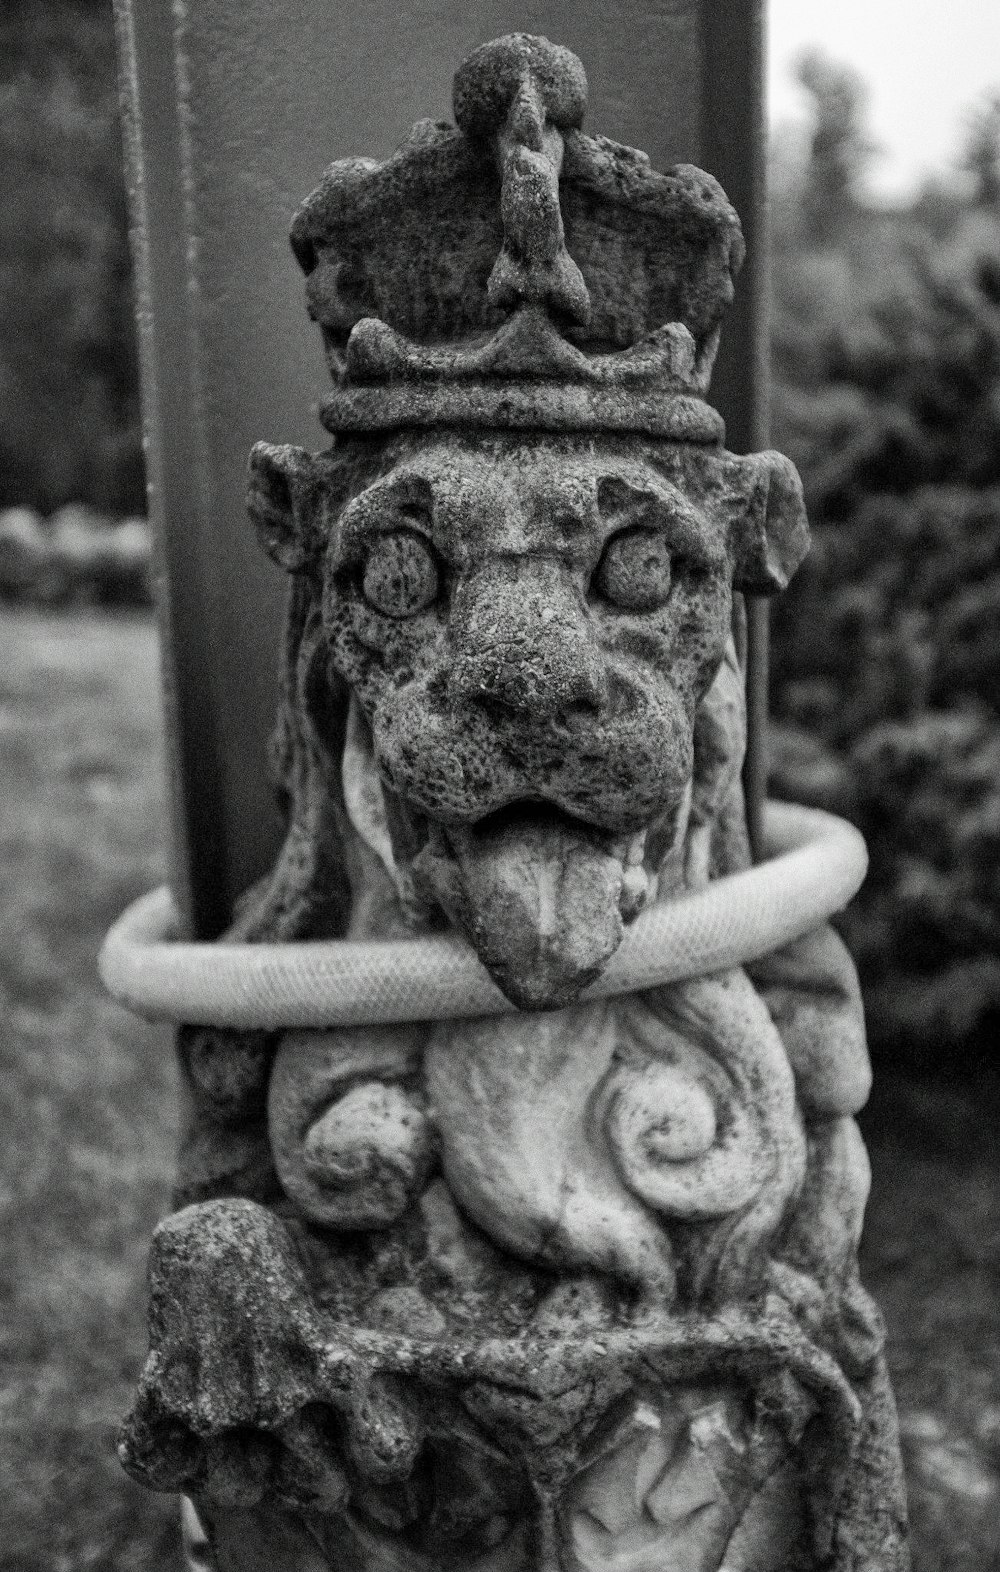 a statue of a lion with a crown on its head